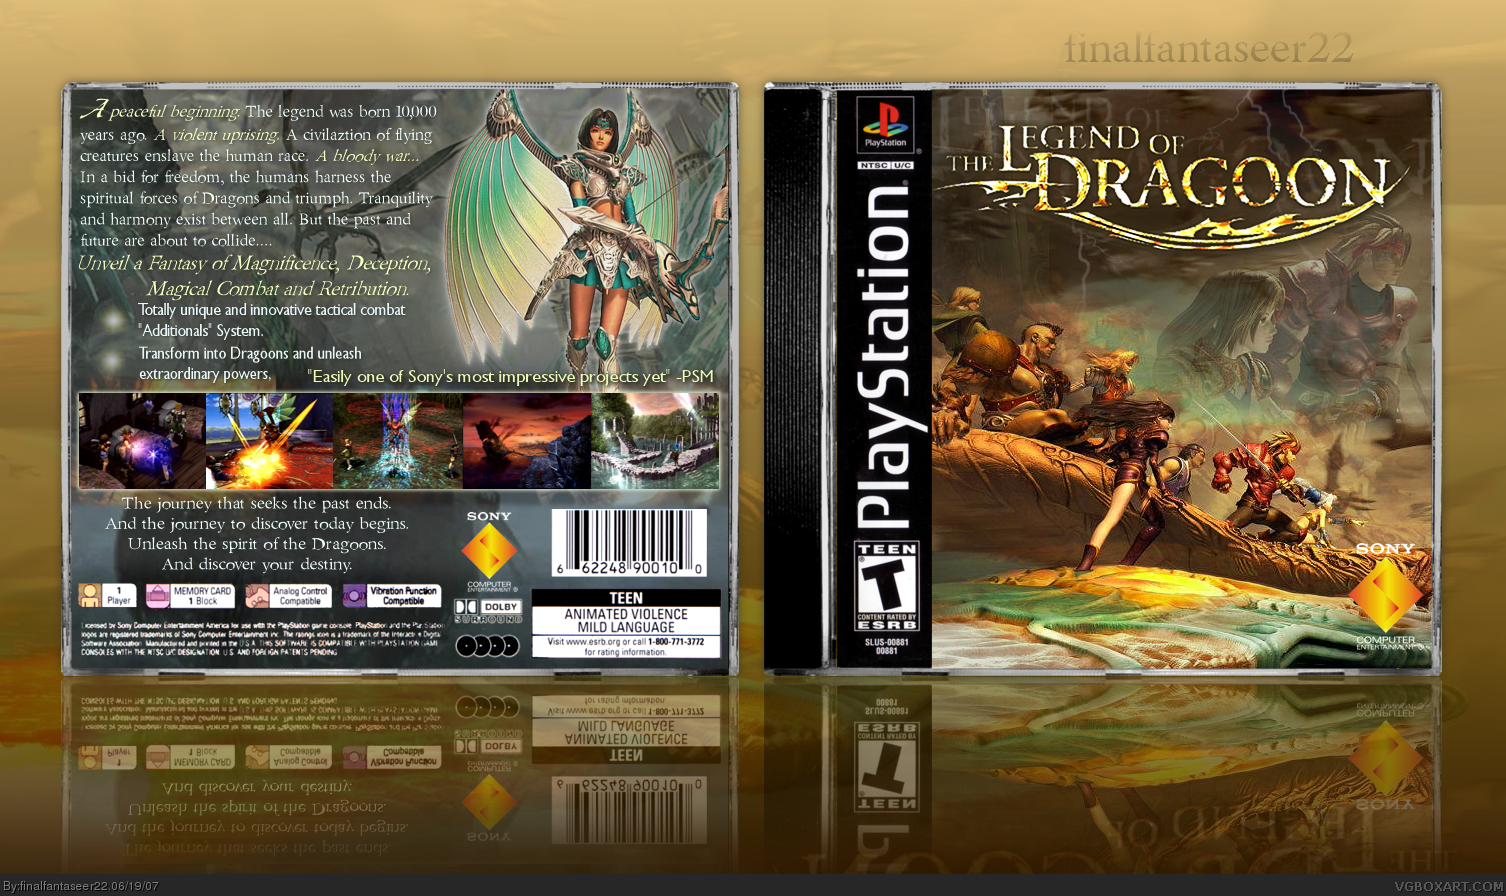 The Legend of Dragoon box cover